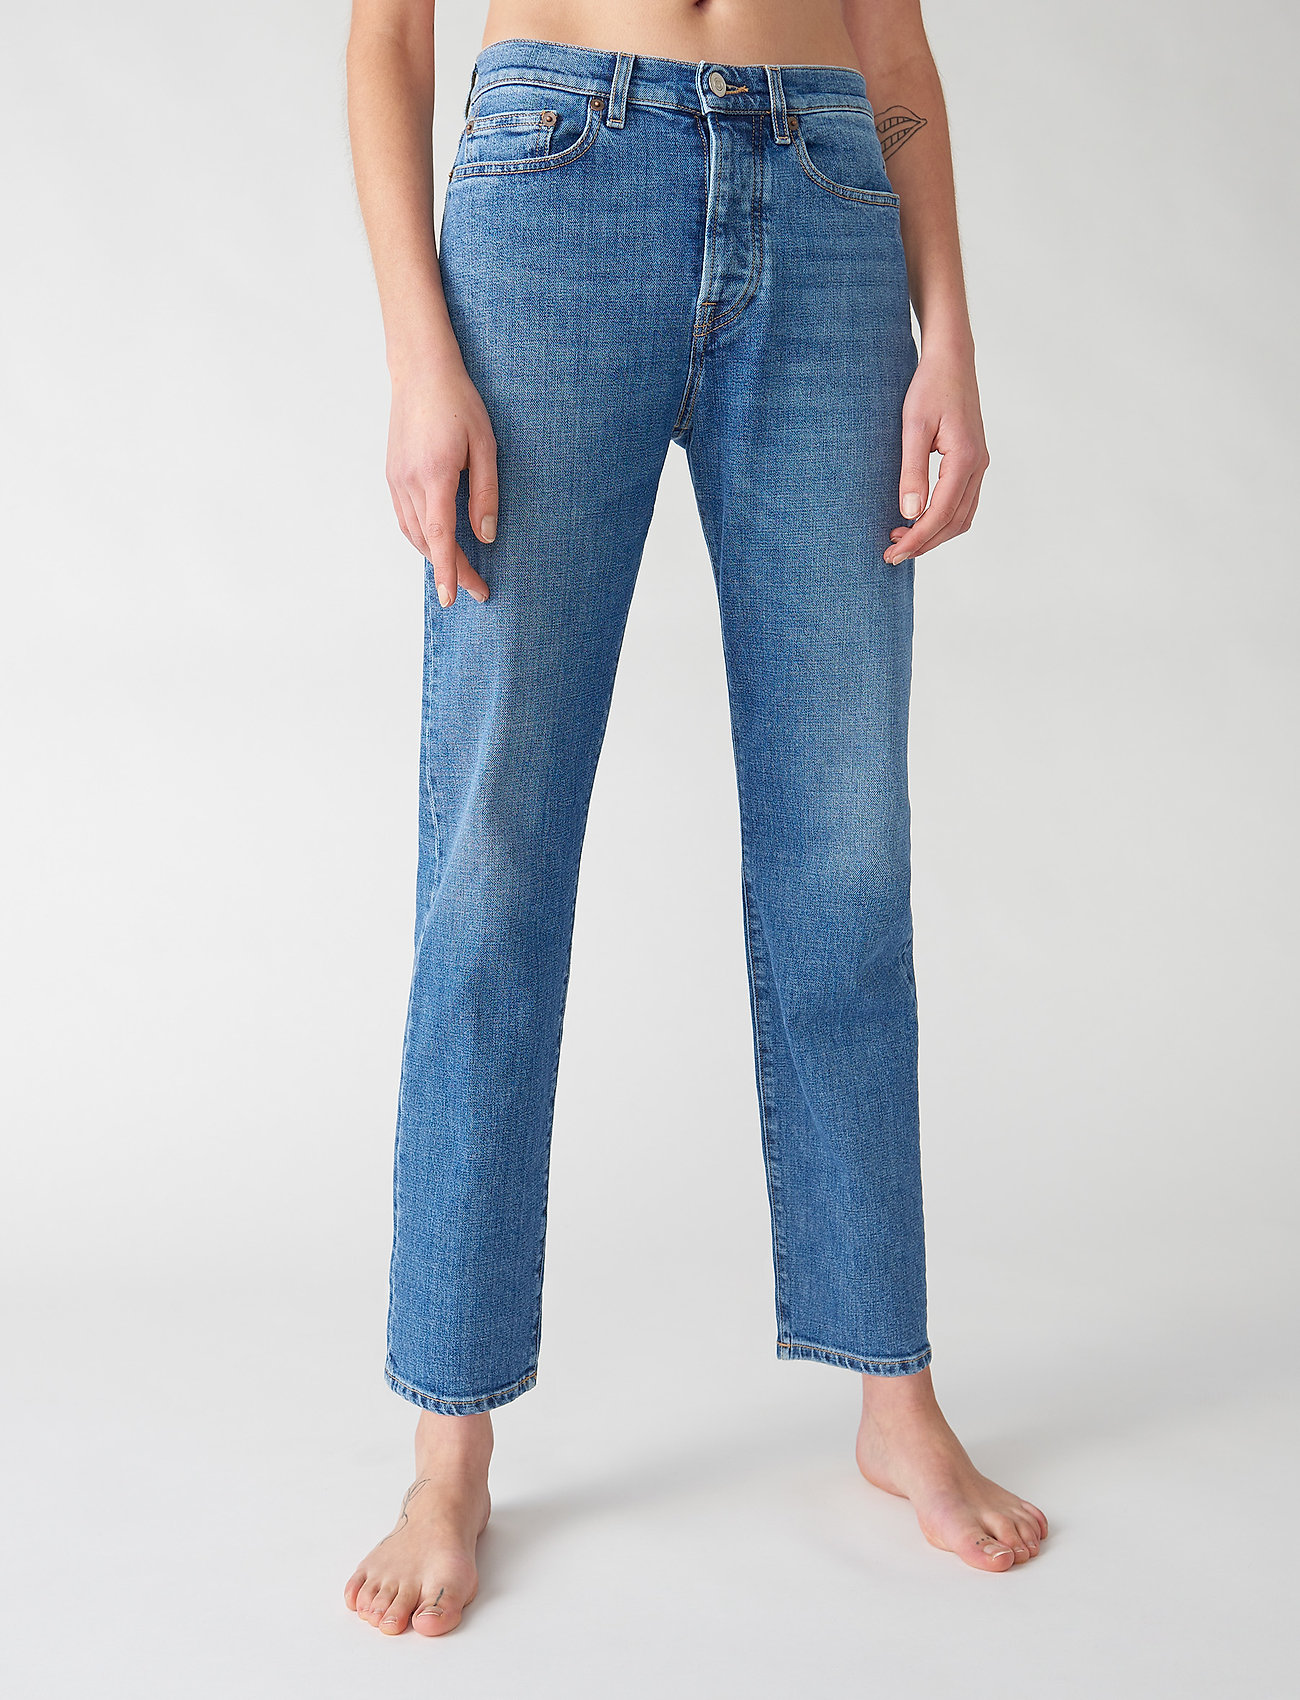 Jeanerica - CW002 Classic - straight jeans - mid vintage - 0